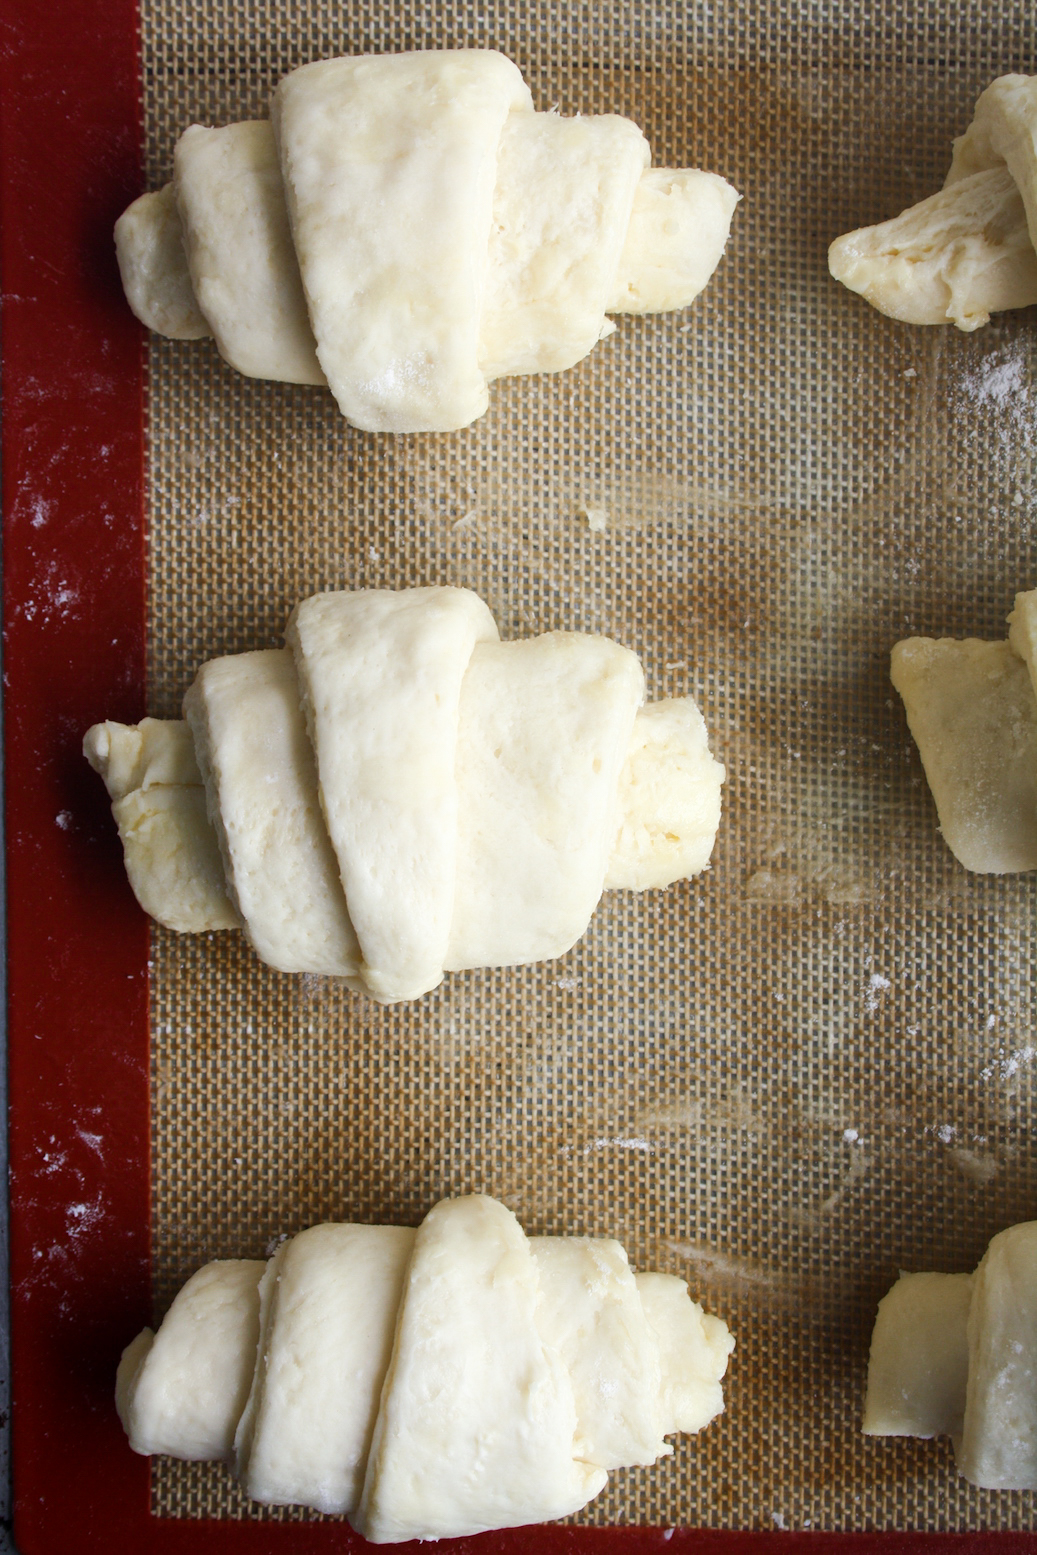 Buttery, fluffy, flaky homemade croissants